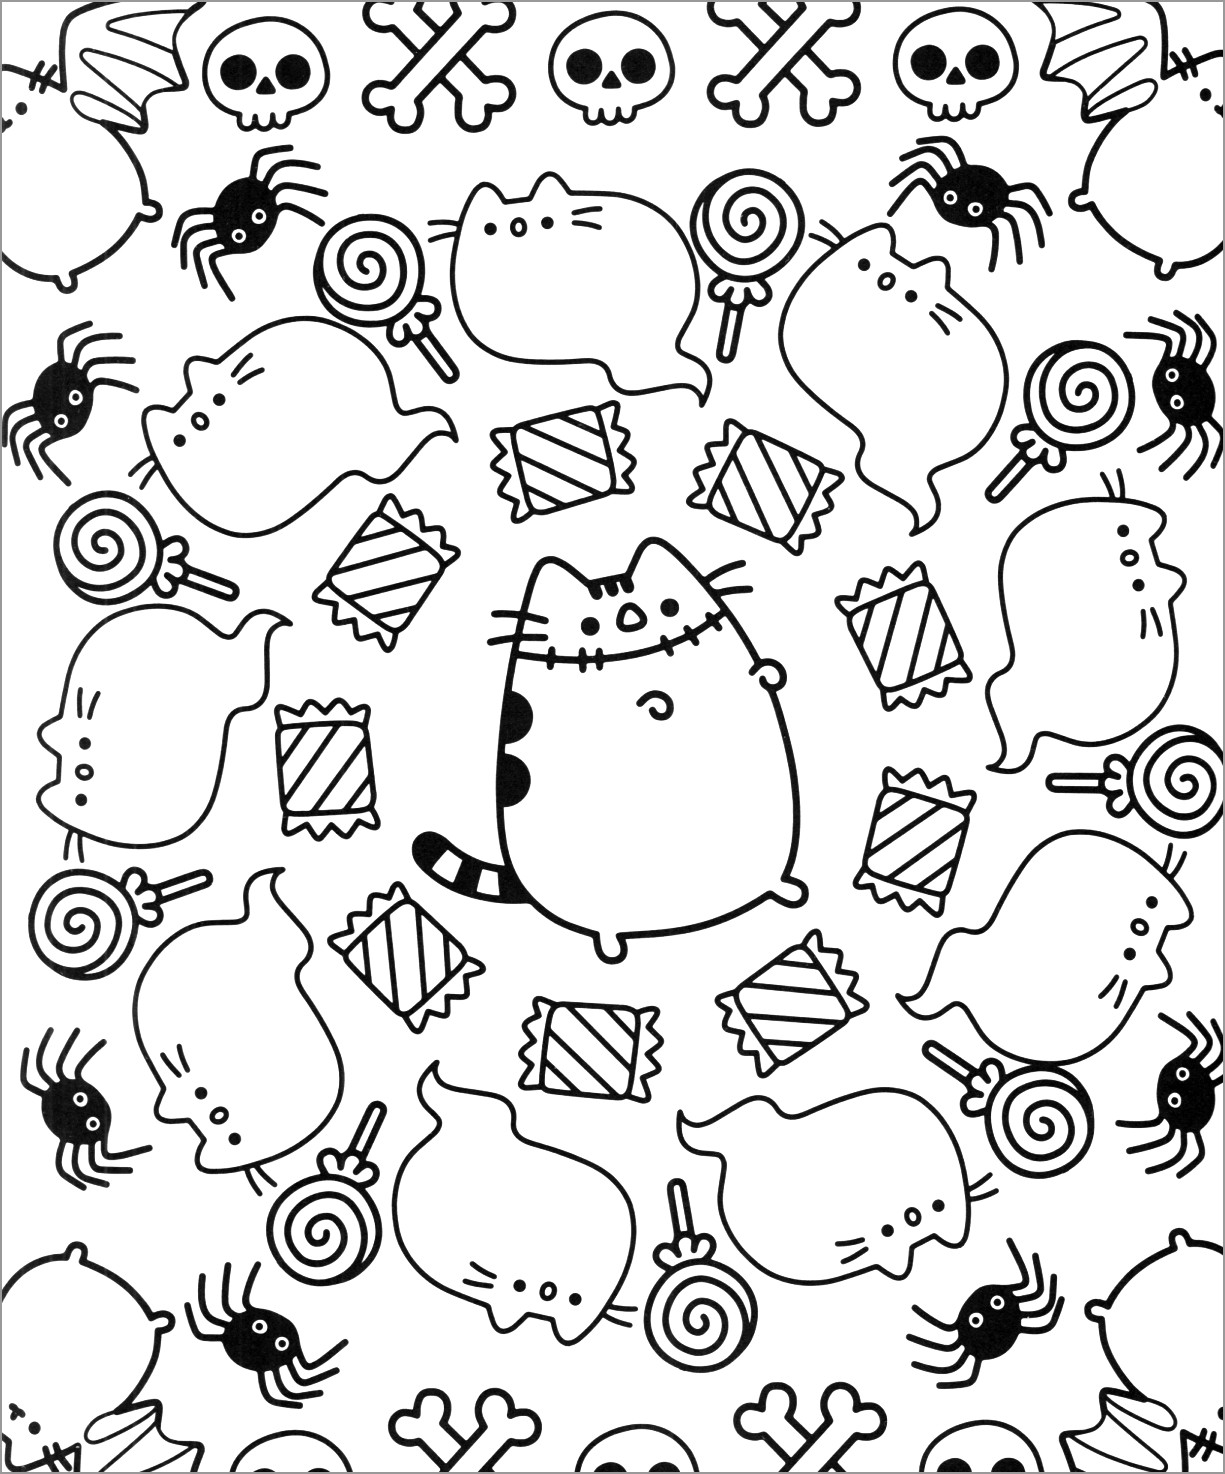 Pusheen Coloring Pages You Can Print   ColoringBay